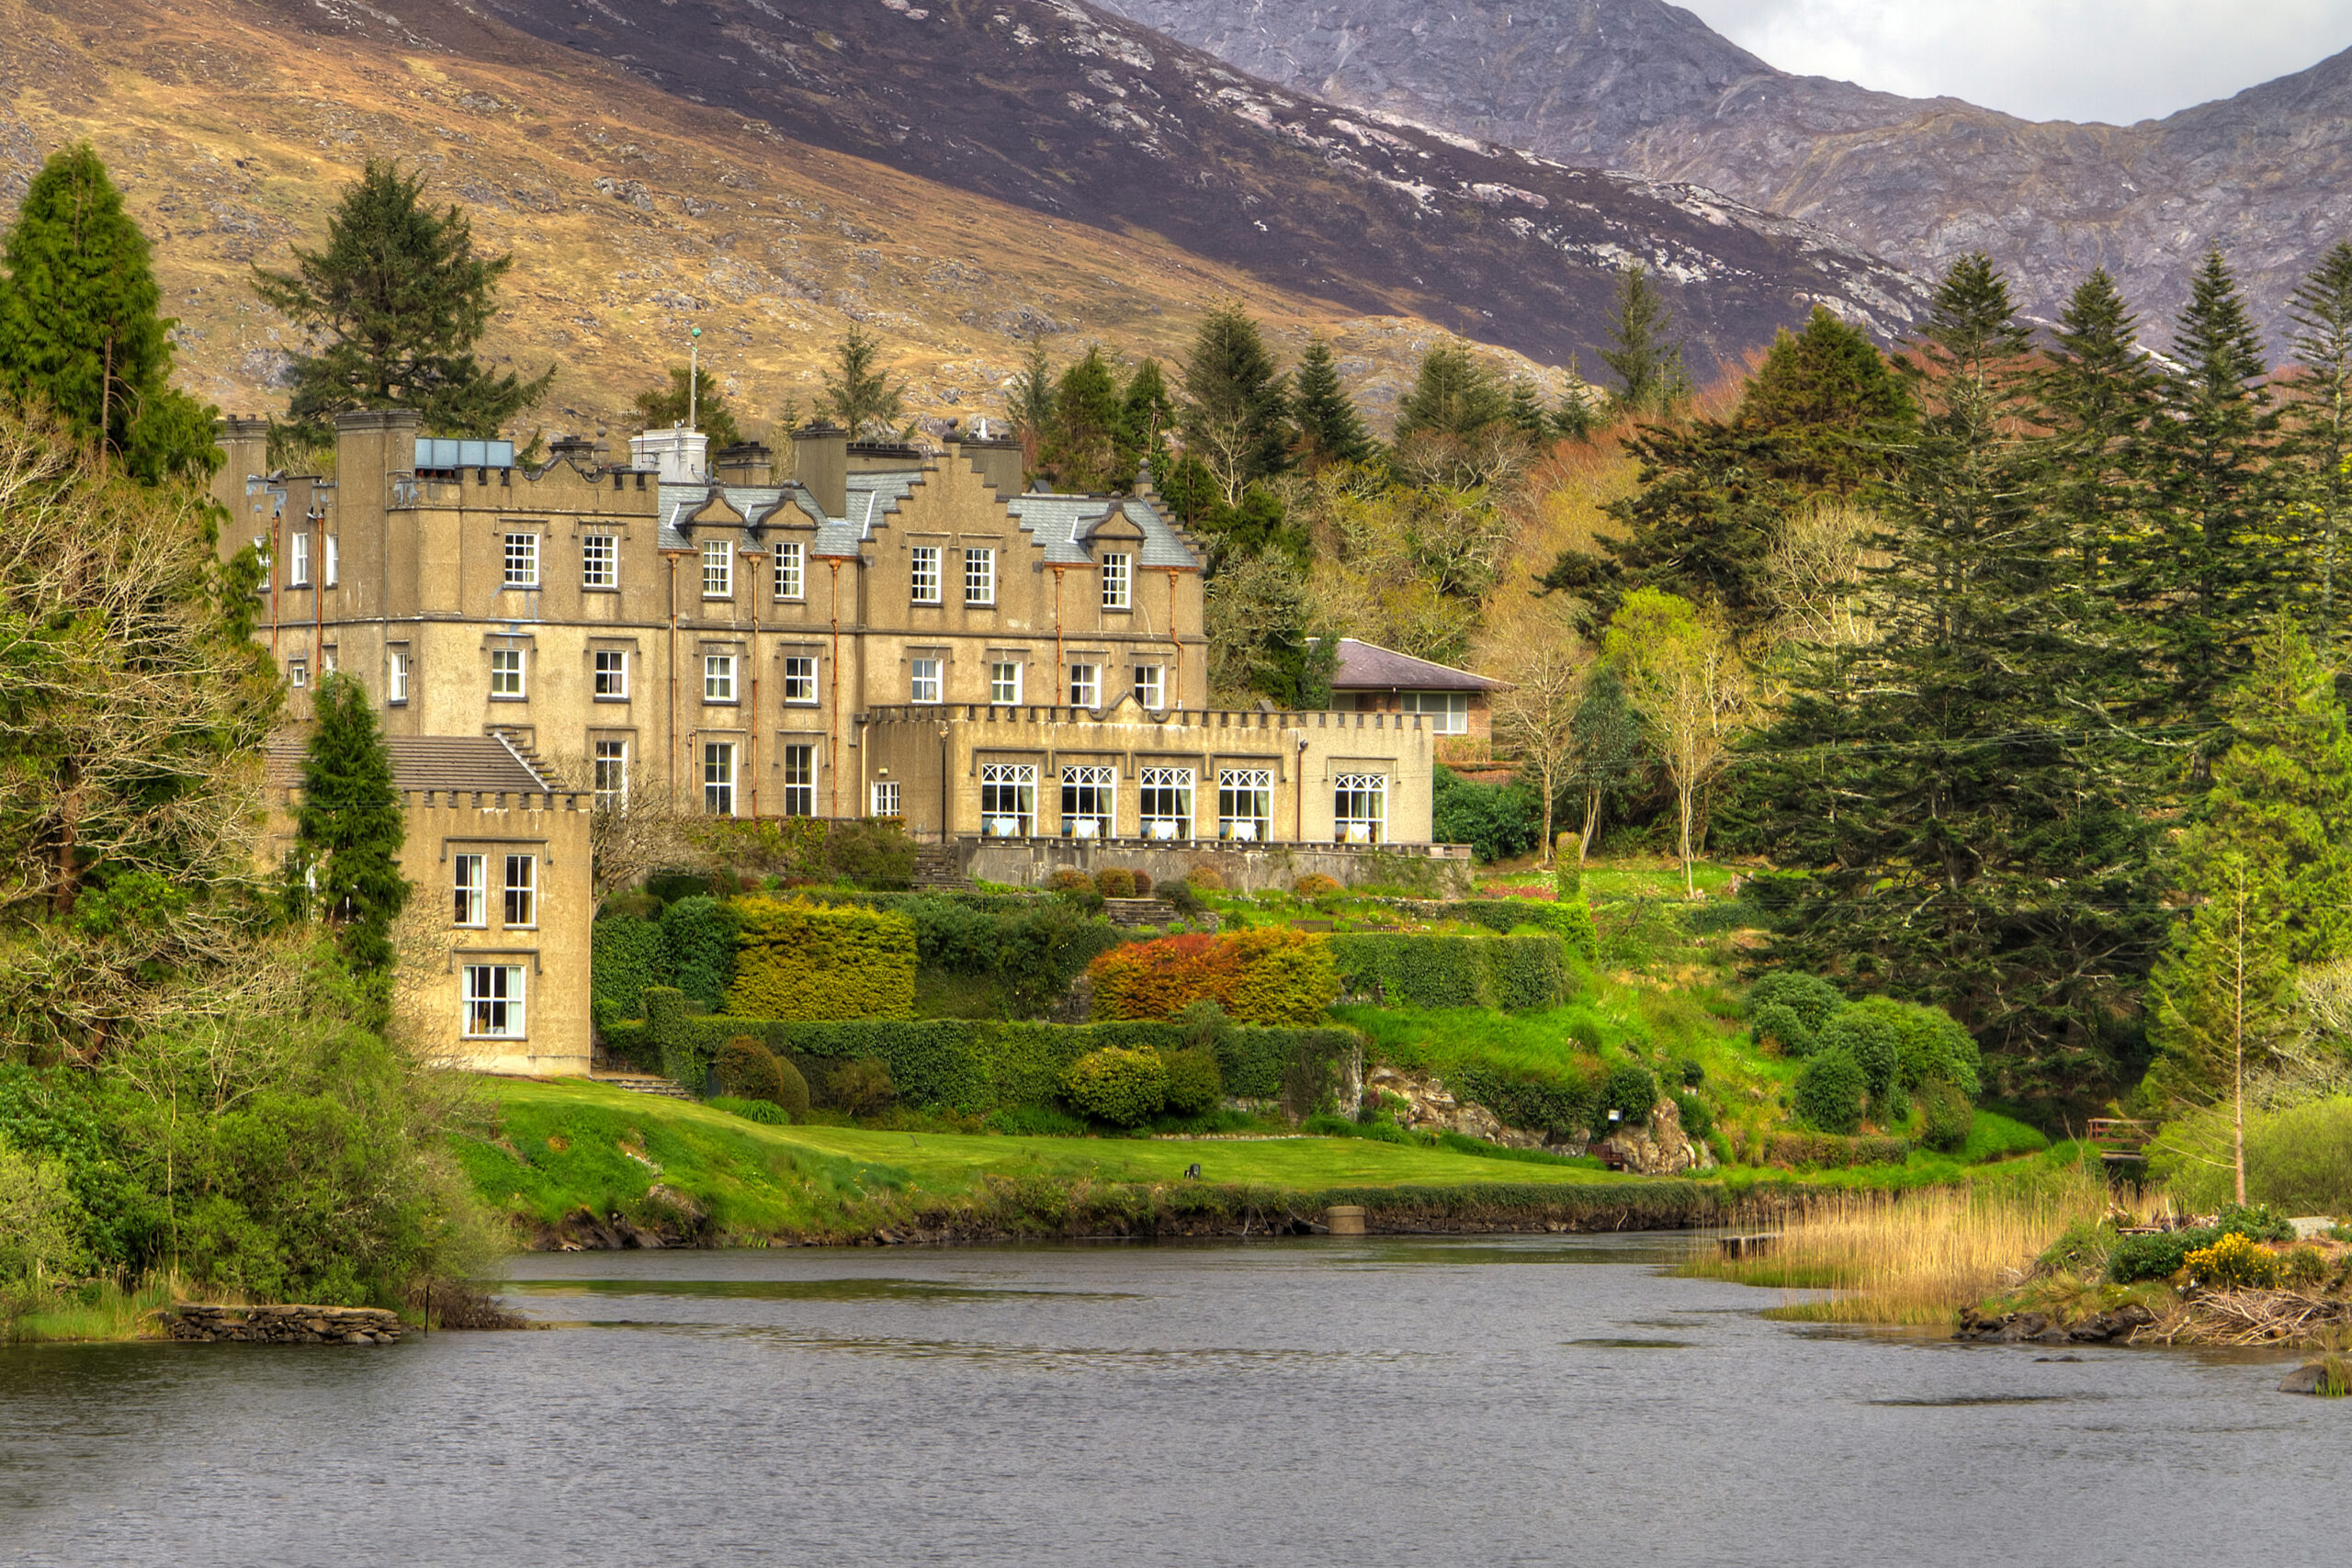 View of Ballynahinch Castle Hotel from the picturesque river including a view of the stunning mountains and evergreen trees surrounding it. 